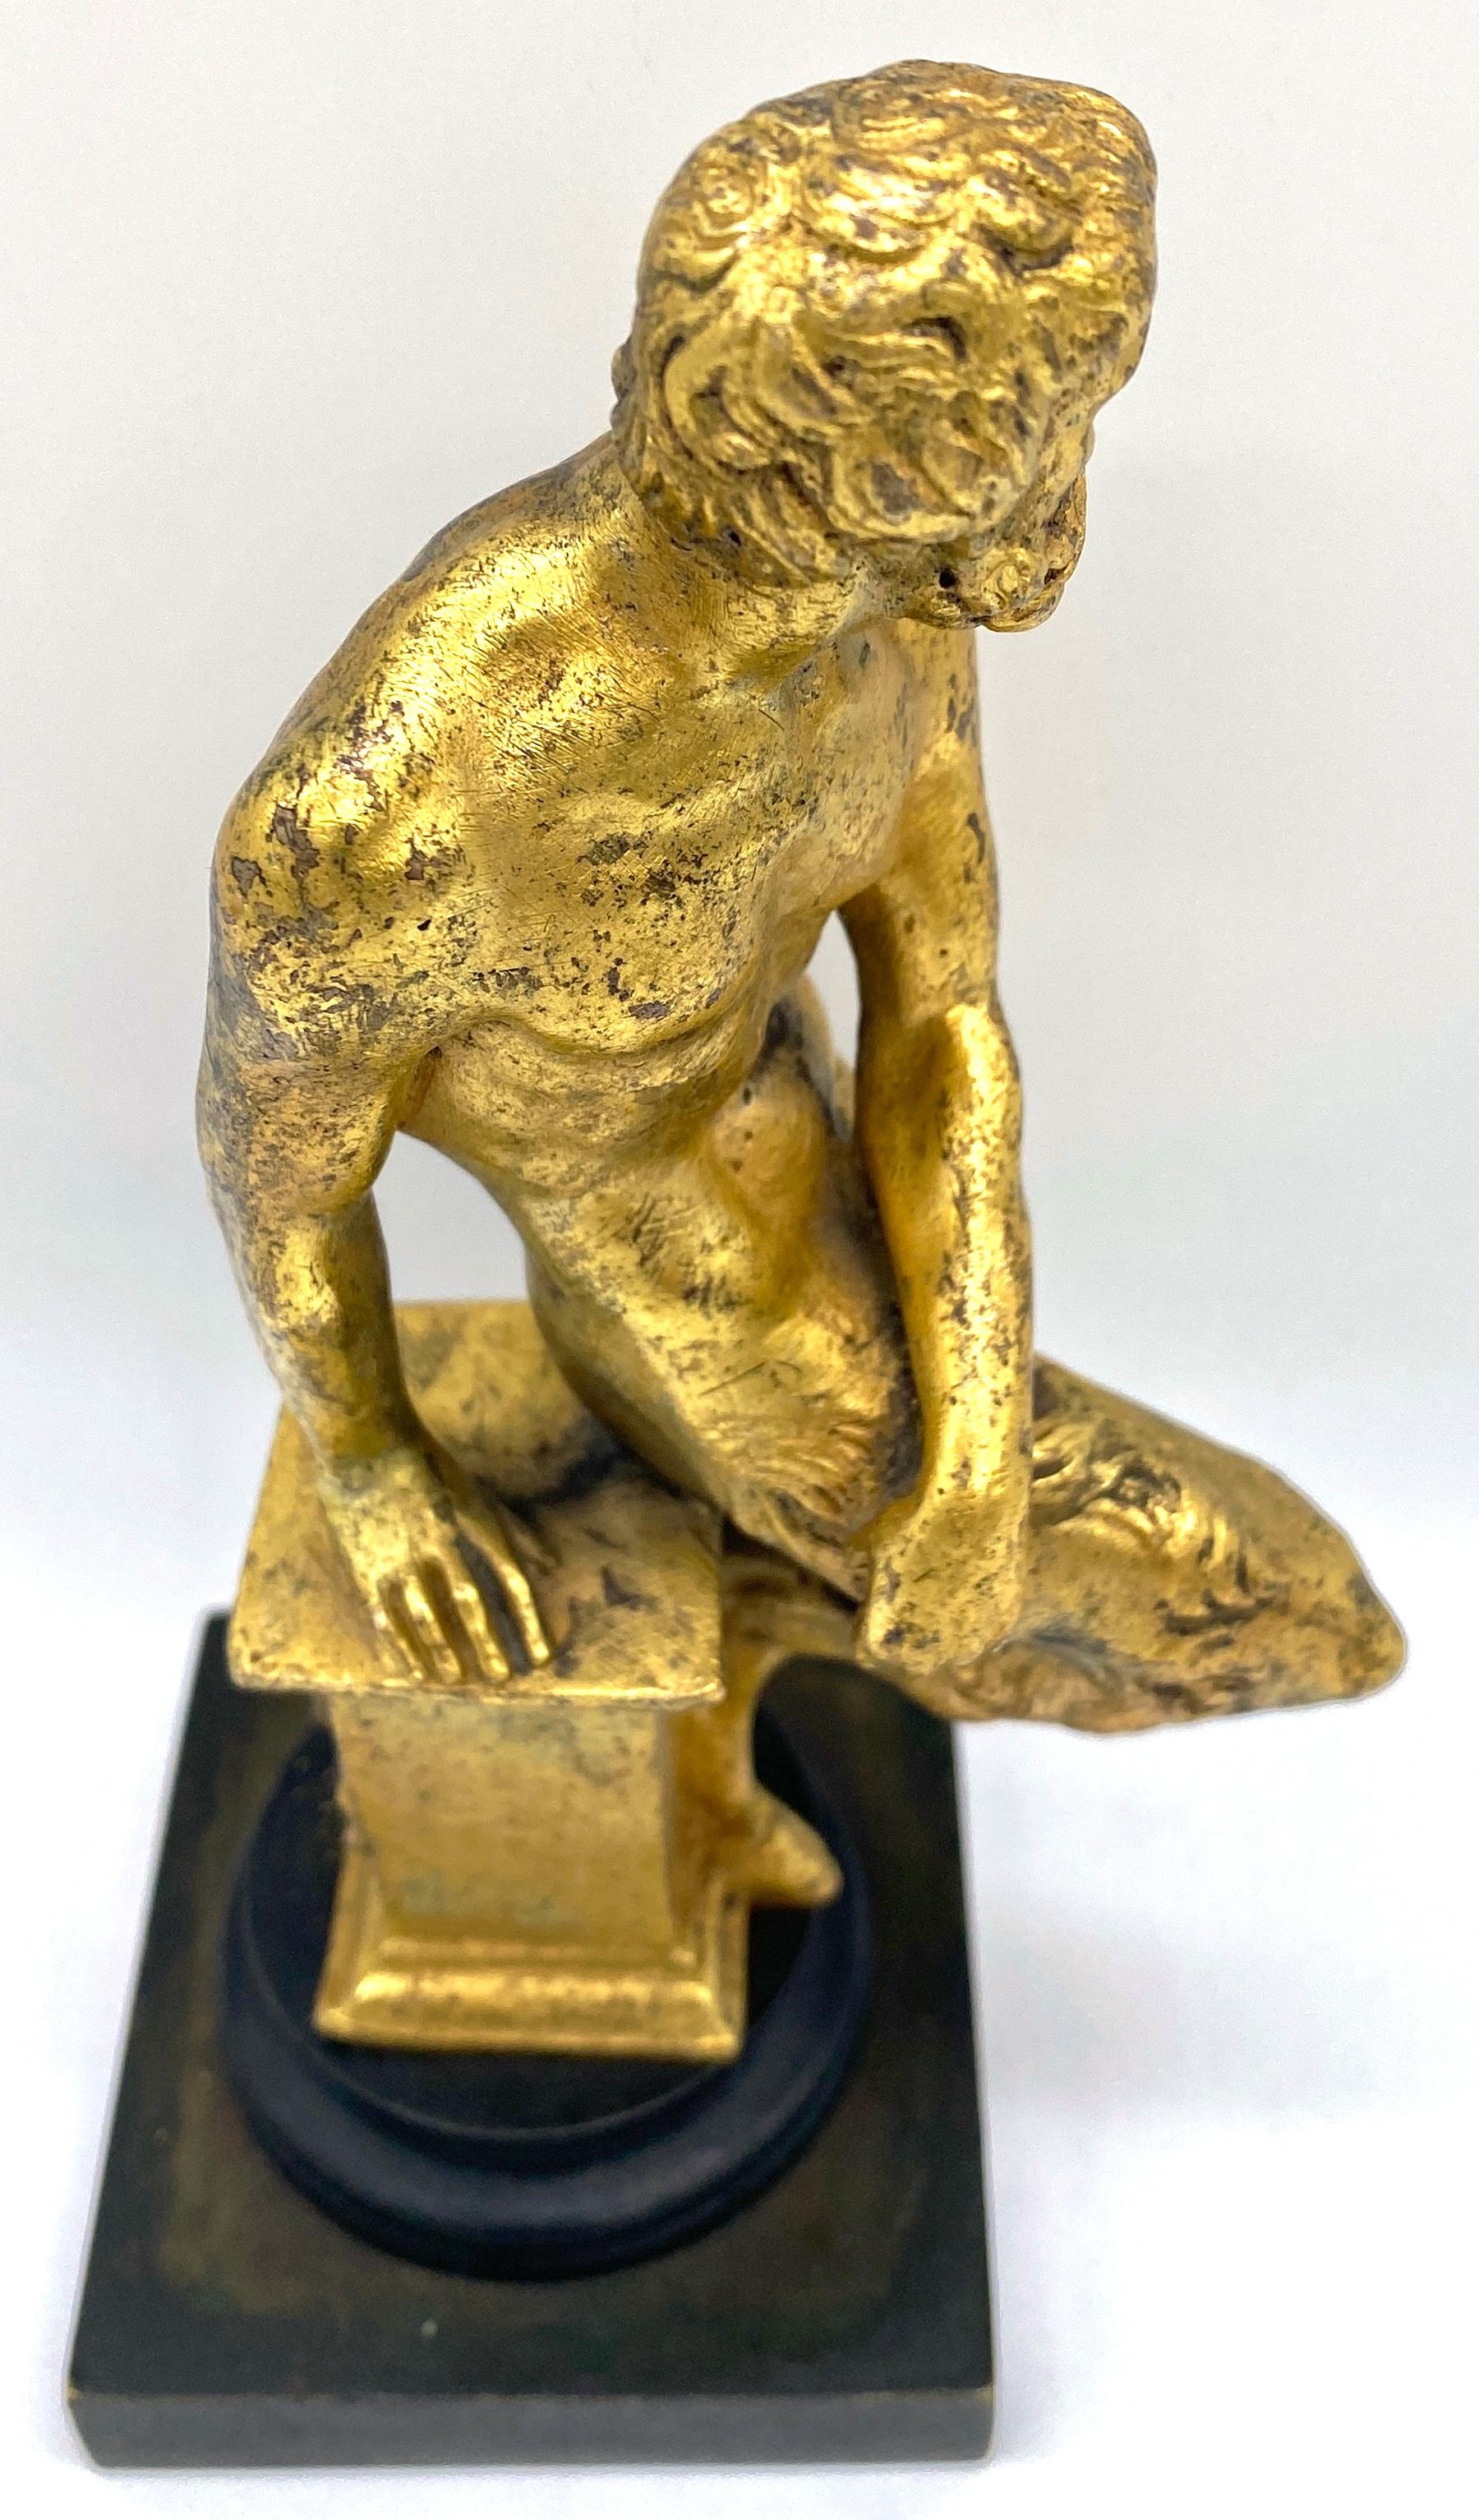 19th Century French Ormolu & Patinated Bronze Sculpture of a Seated Satyr  For Sale 2